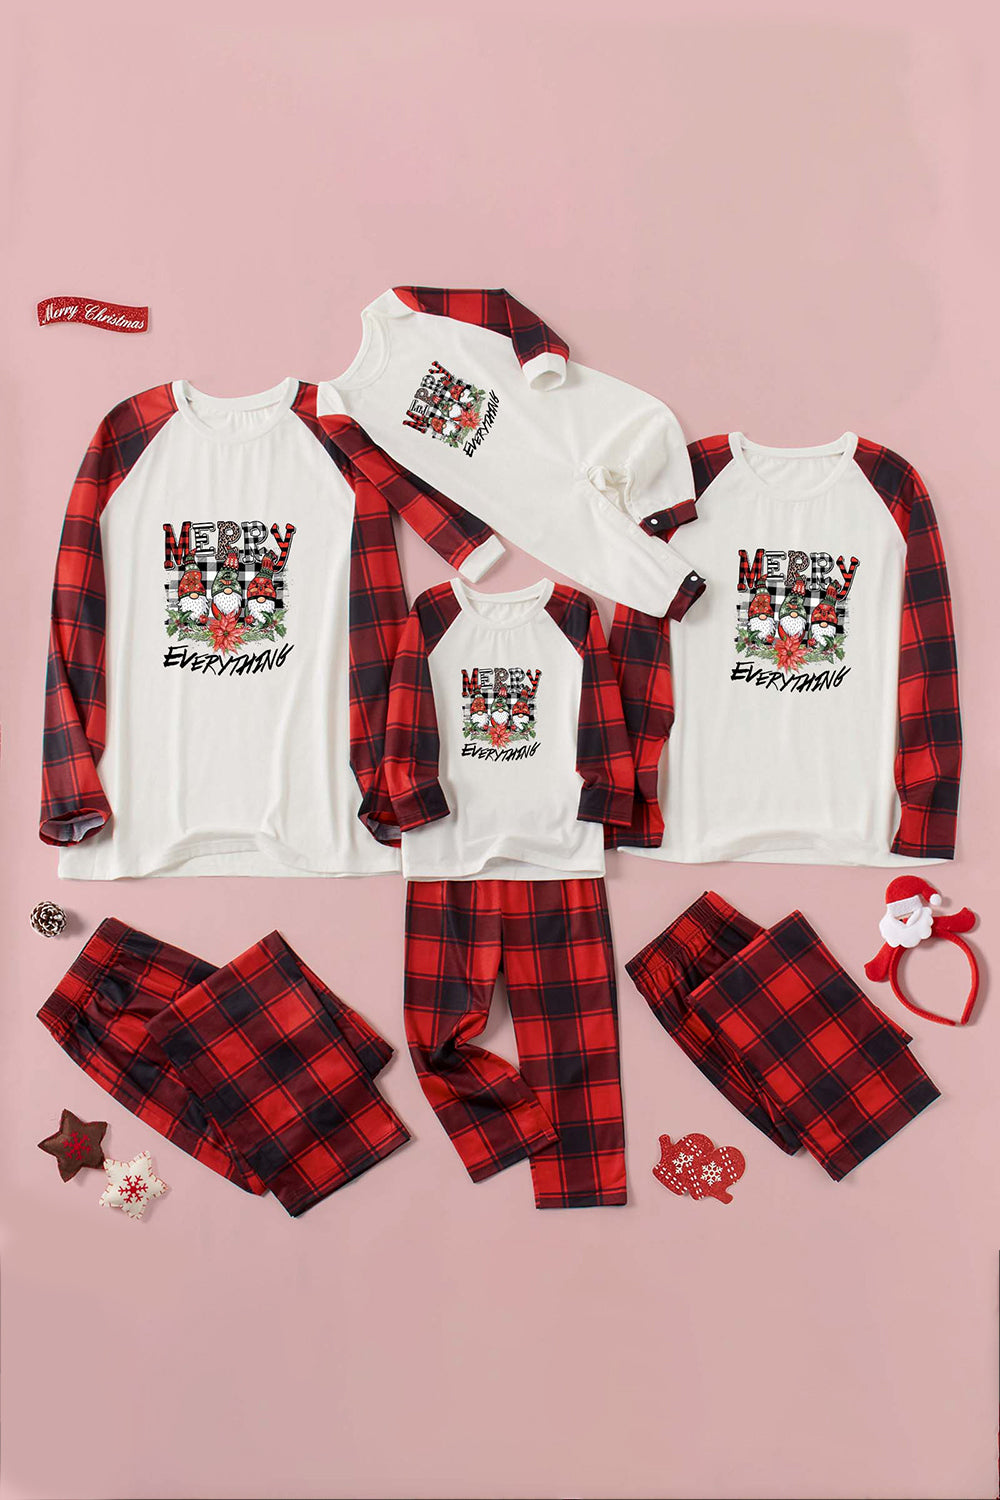 MERRY EVERYTHING Graphic Top and Plaid Pants Set